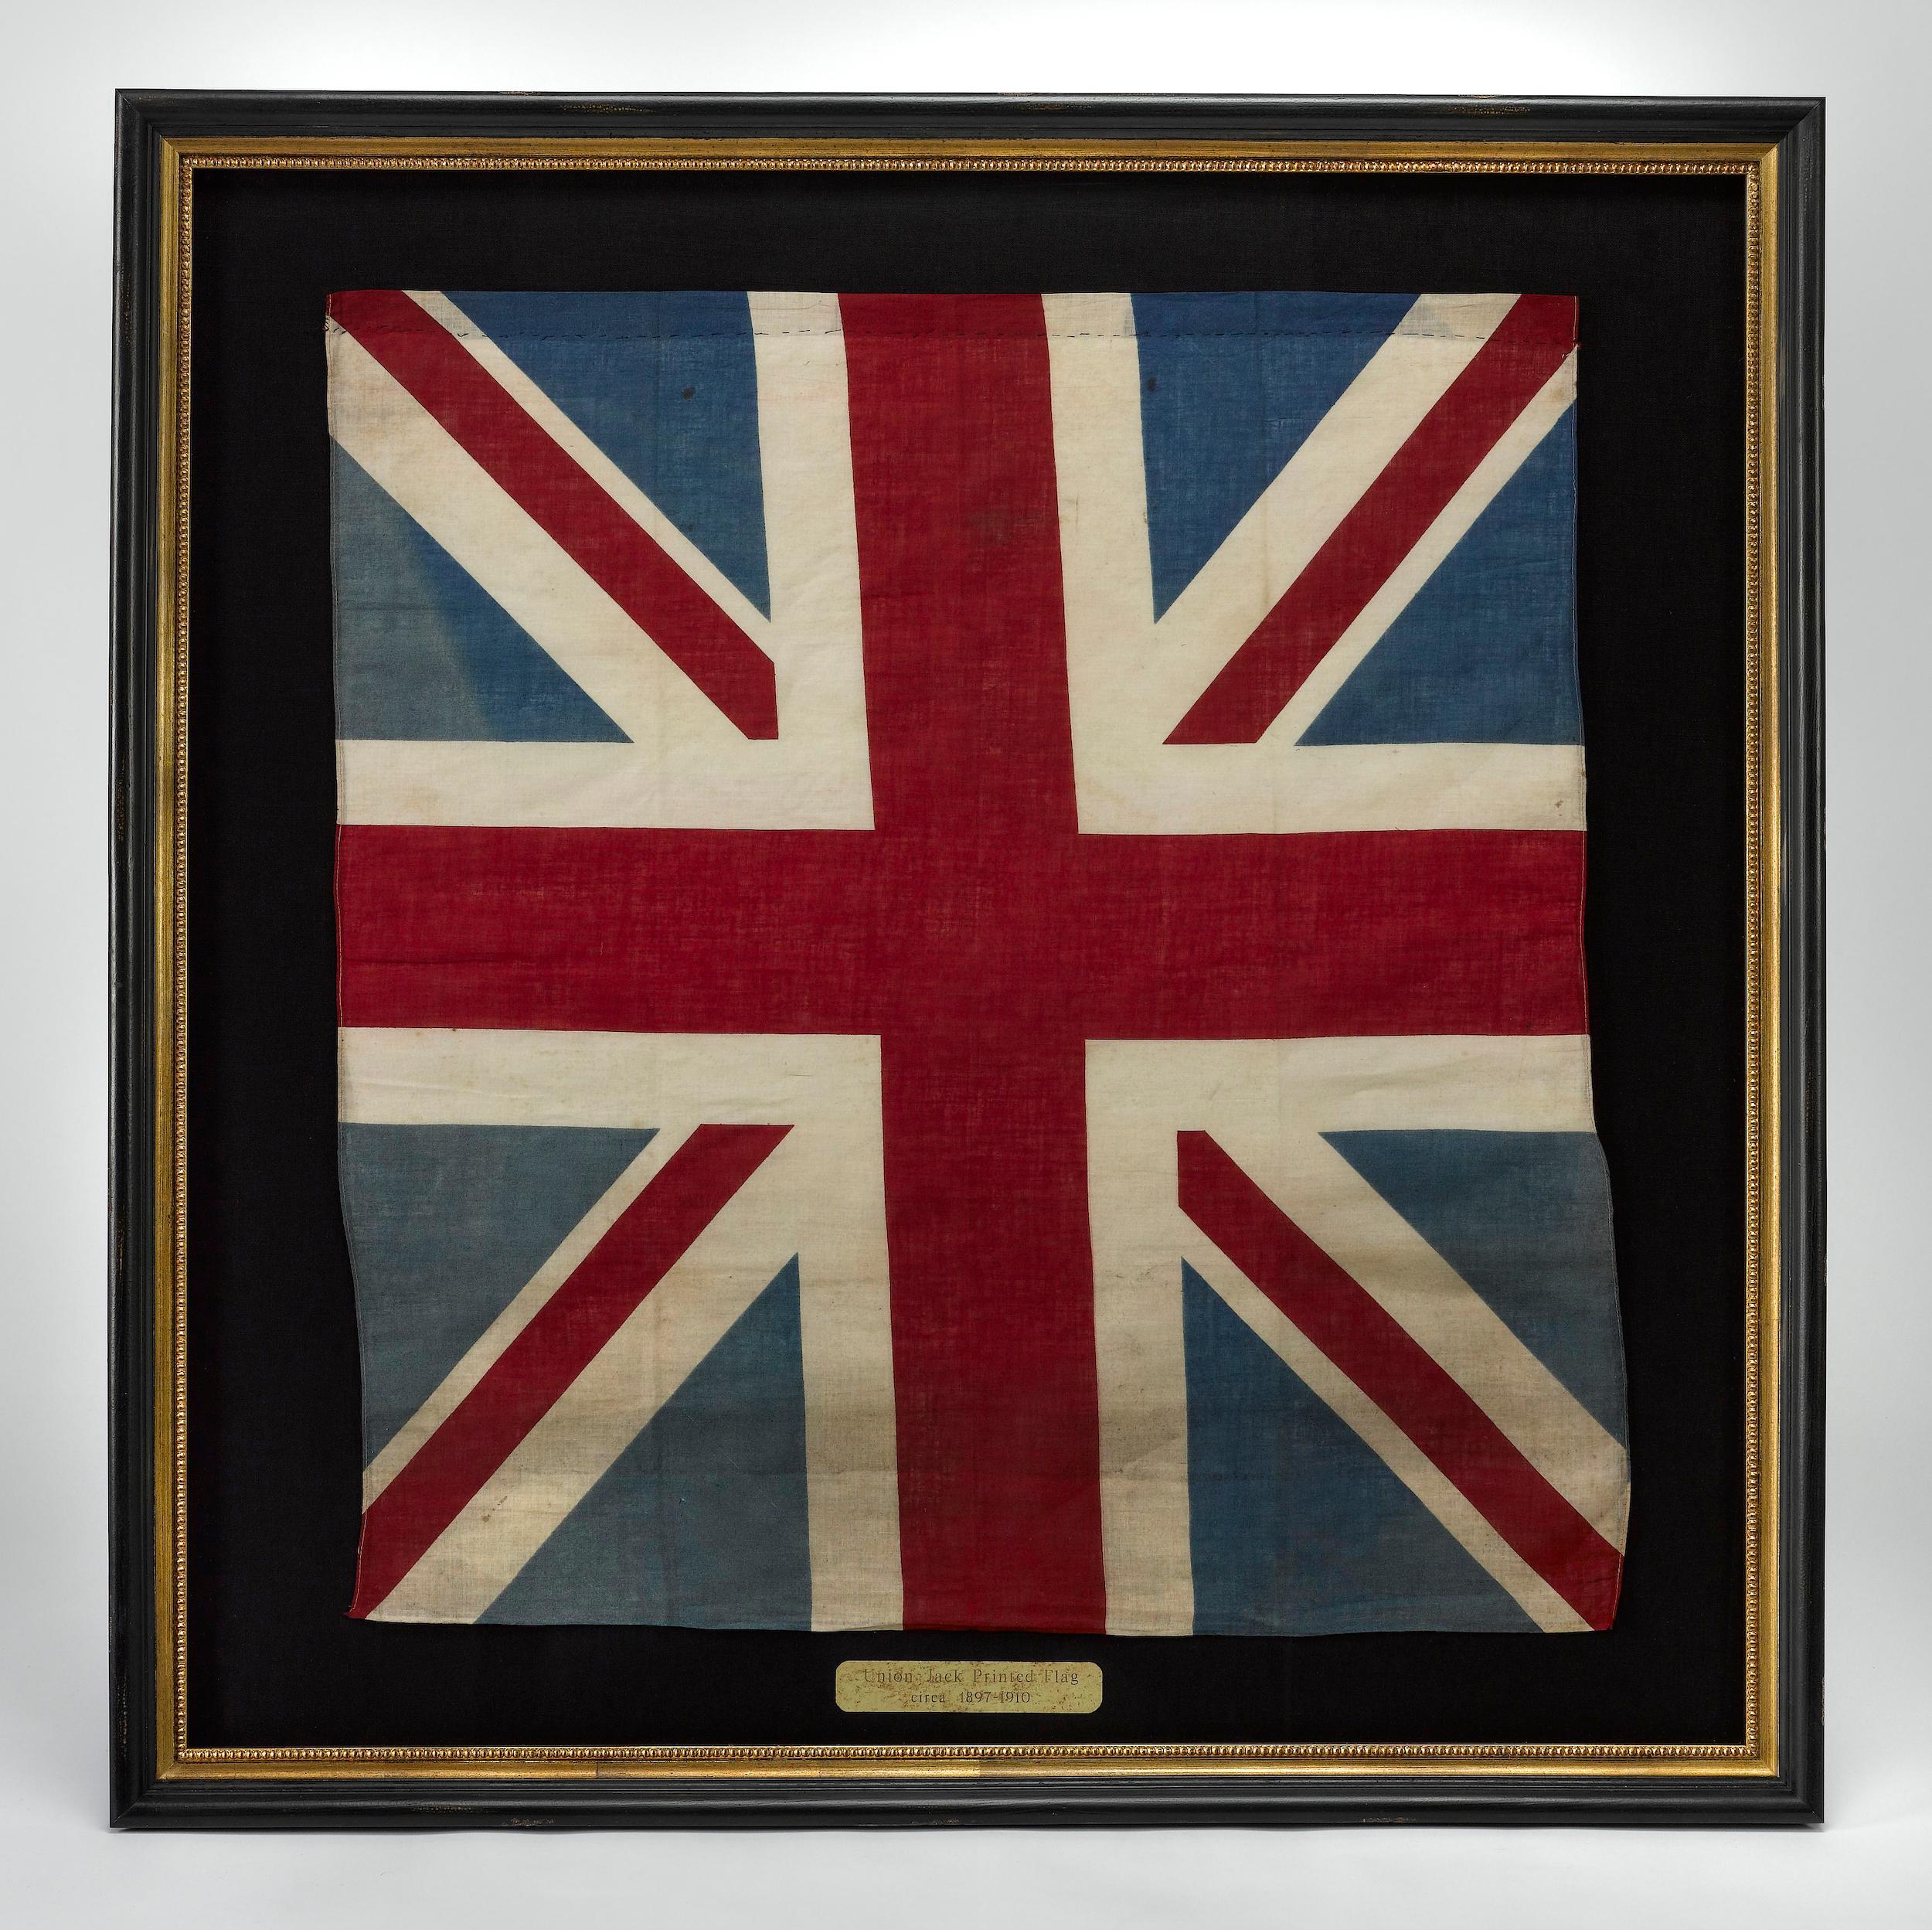 Presented is a printed Union Jack parade flag. The flag dates to the turn of the century, from 1897- 1910. The flag is printed on cotton and is hemmed at top and bottom with white machine-sewn thread. 

This flag is a combination of the flags of